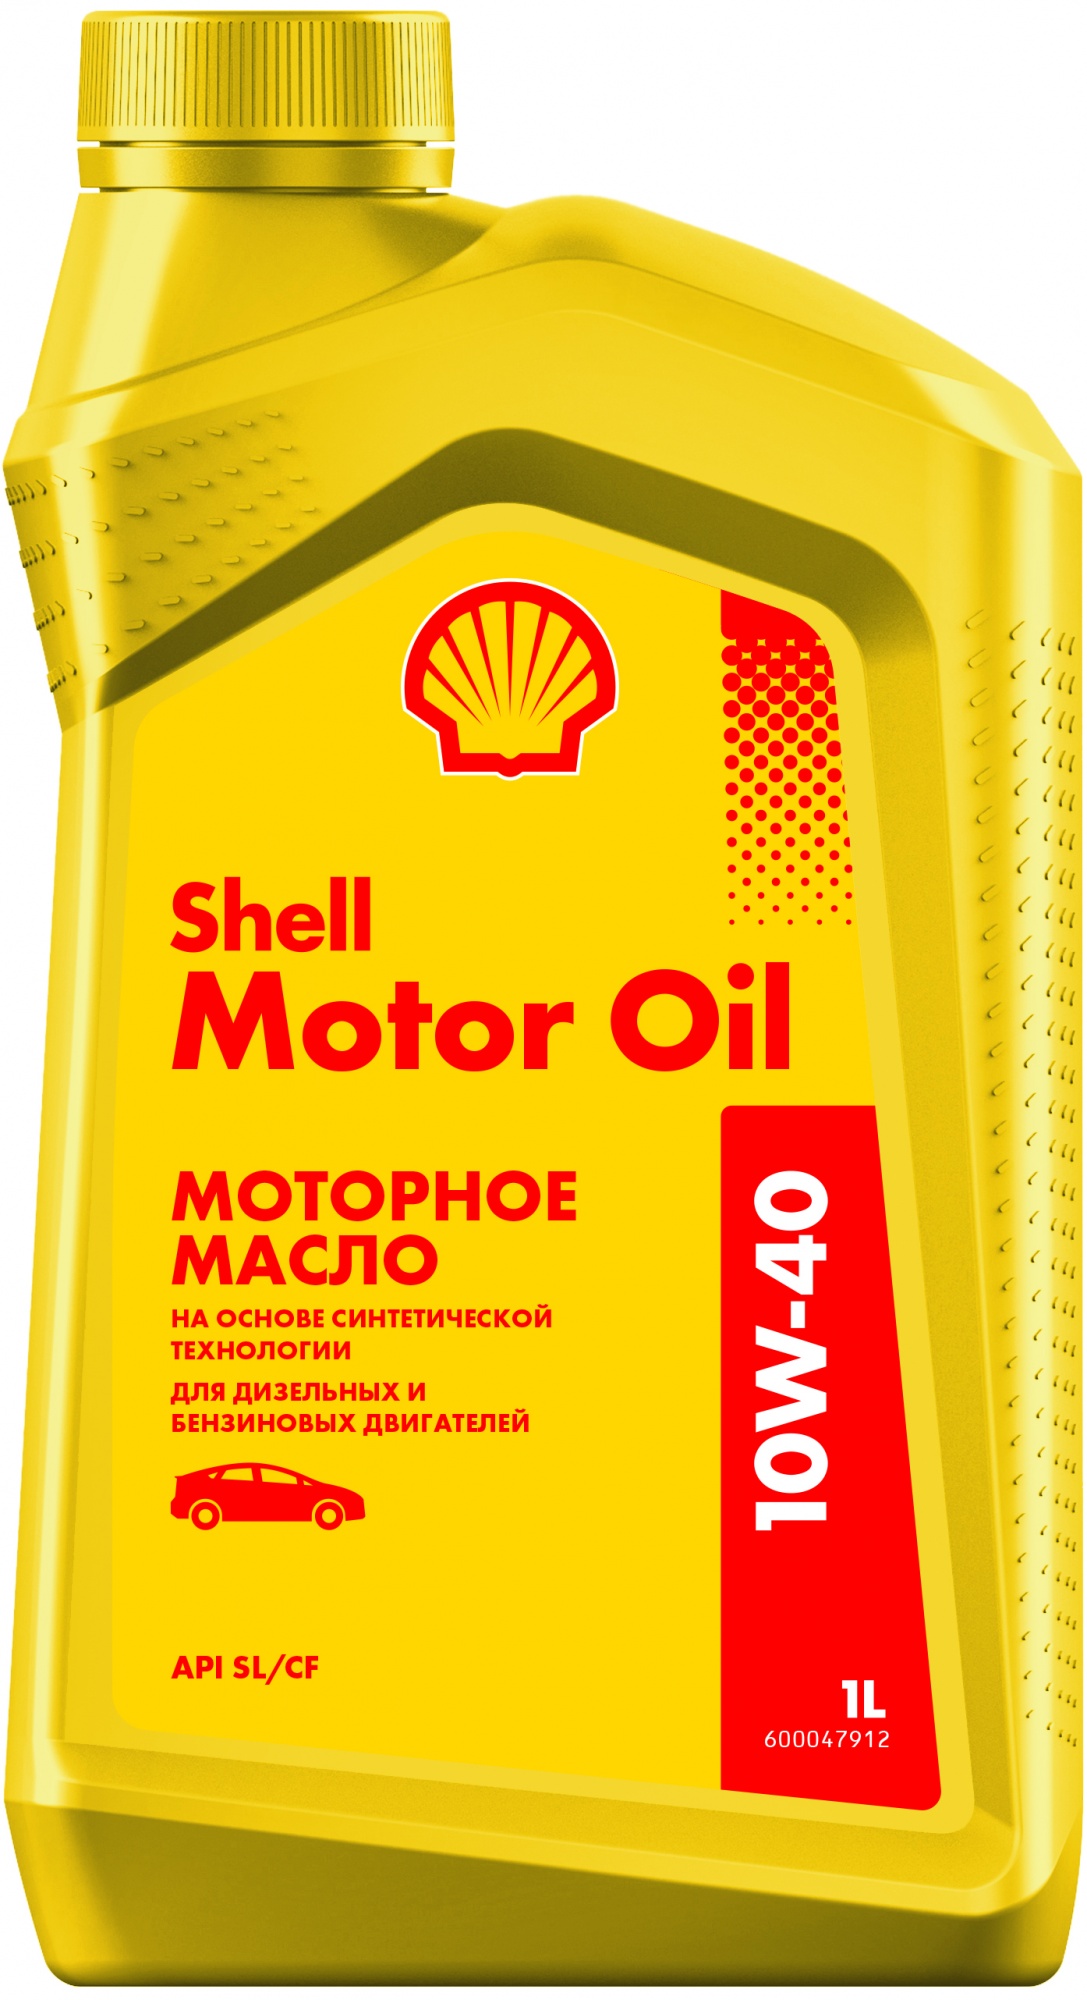 Shell 10w40 Motor Oil 1л.масло моторное